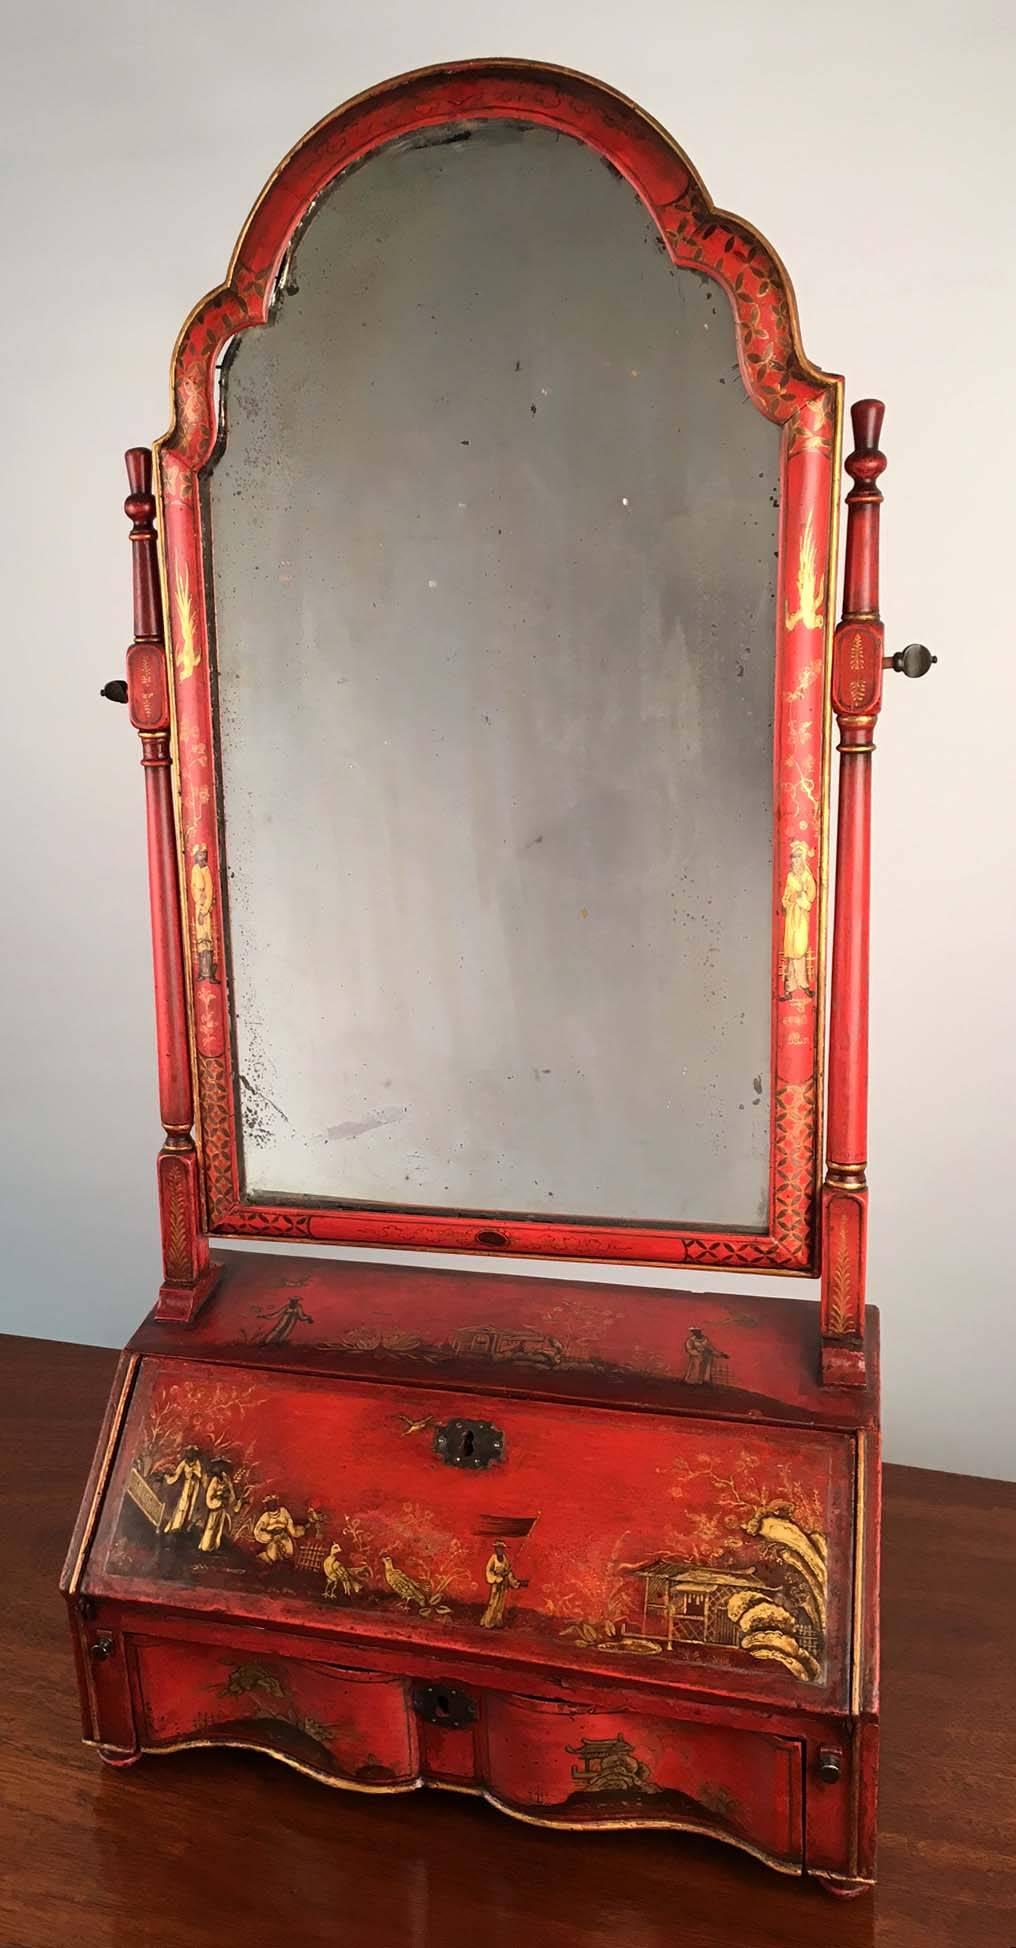 A George I red japanned and gilt toilet mirror, the period plate in double arched and ovalo frame, the stand with fall front and fitted interior above a single shaped drawer en arbalete, the whole gilt painted and in shallow relief with chinoiseries